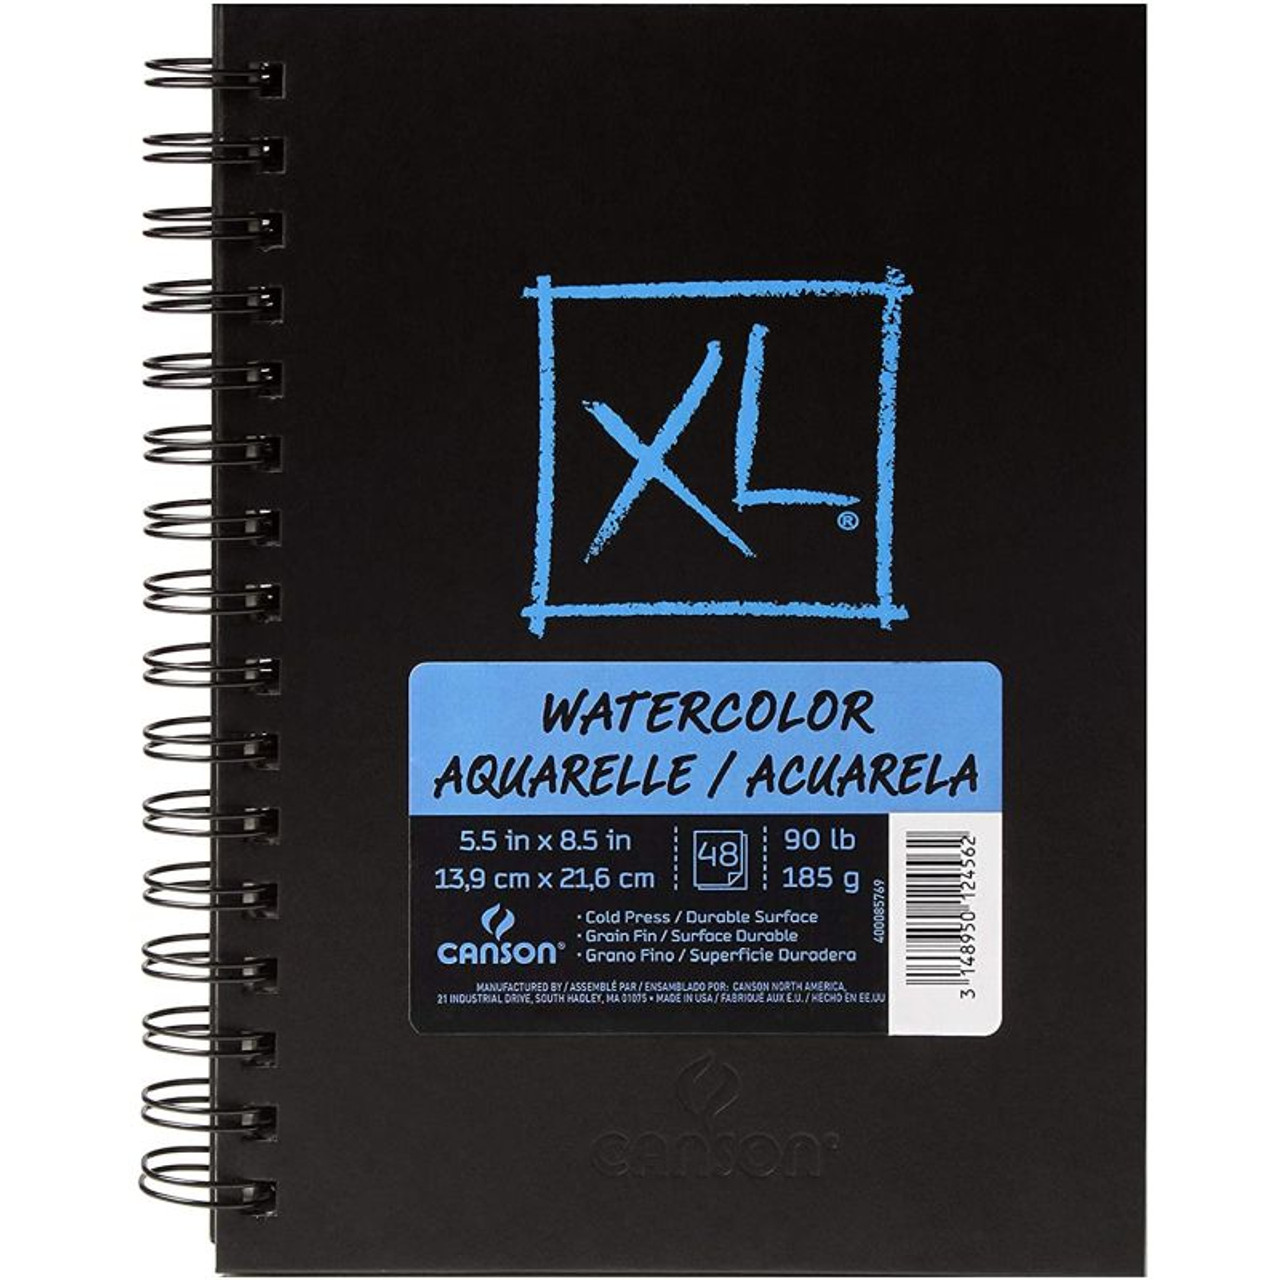 Canson XL Watercolor Book, 48 Sheets, 8.5 x 11